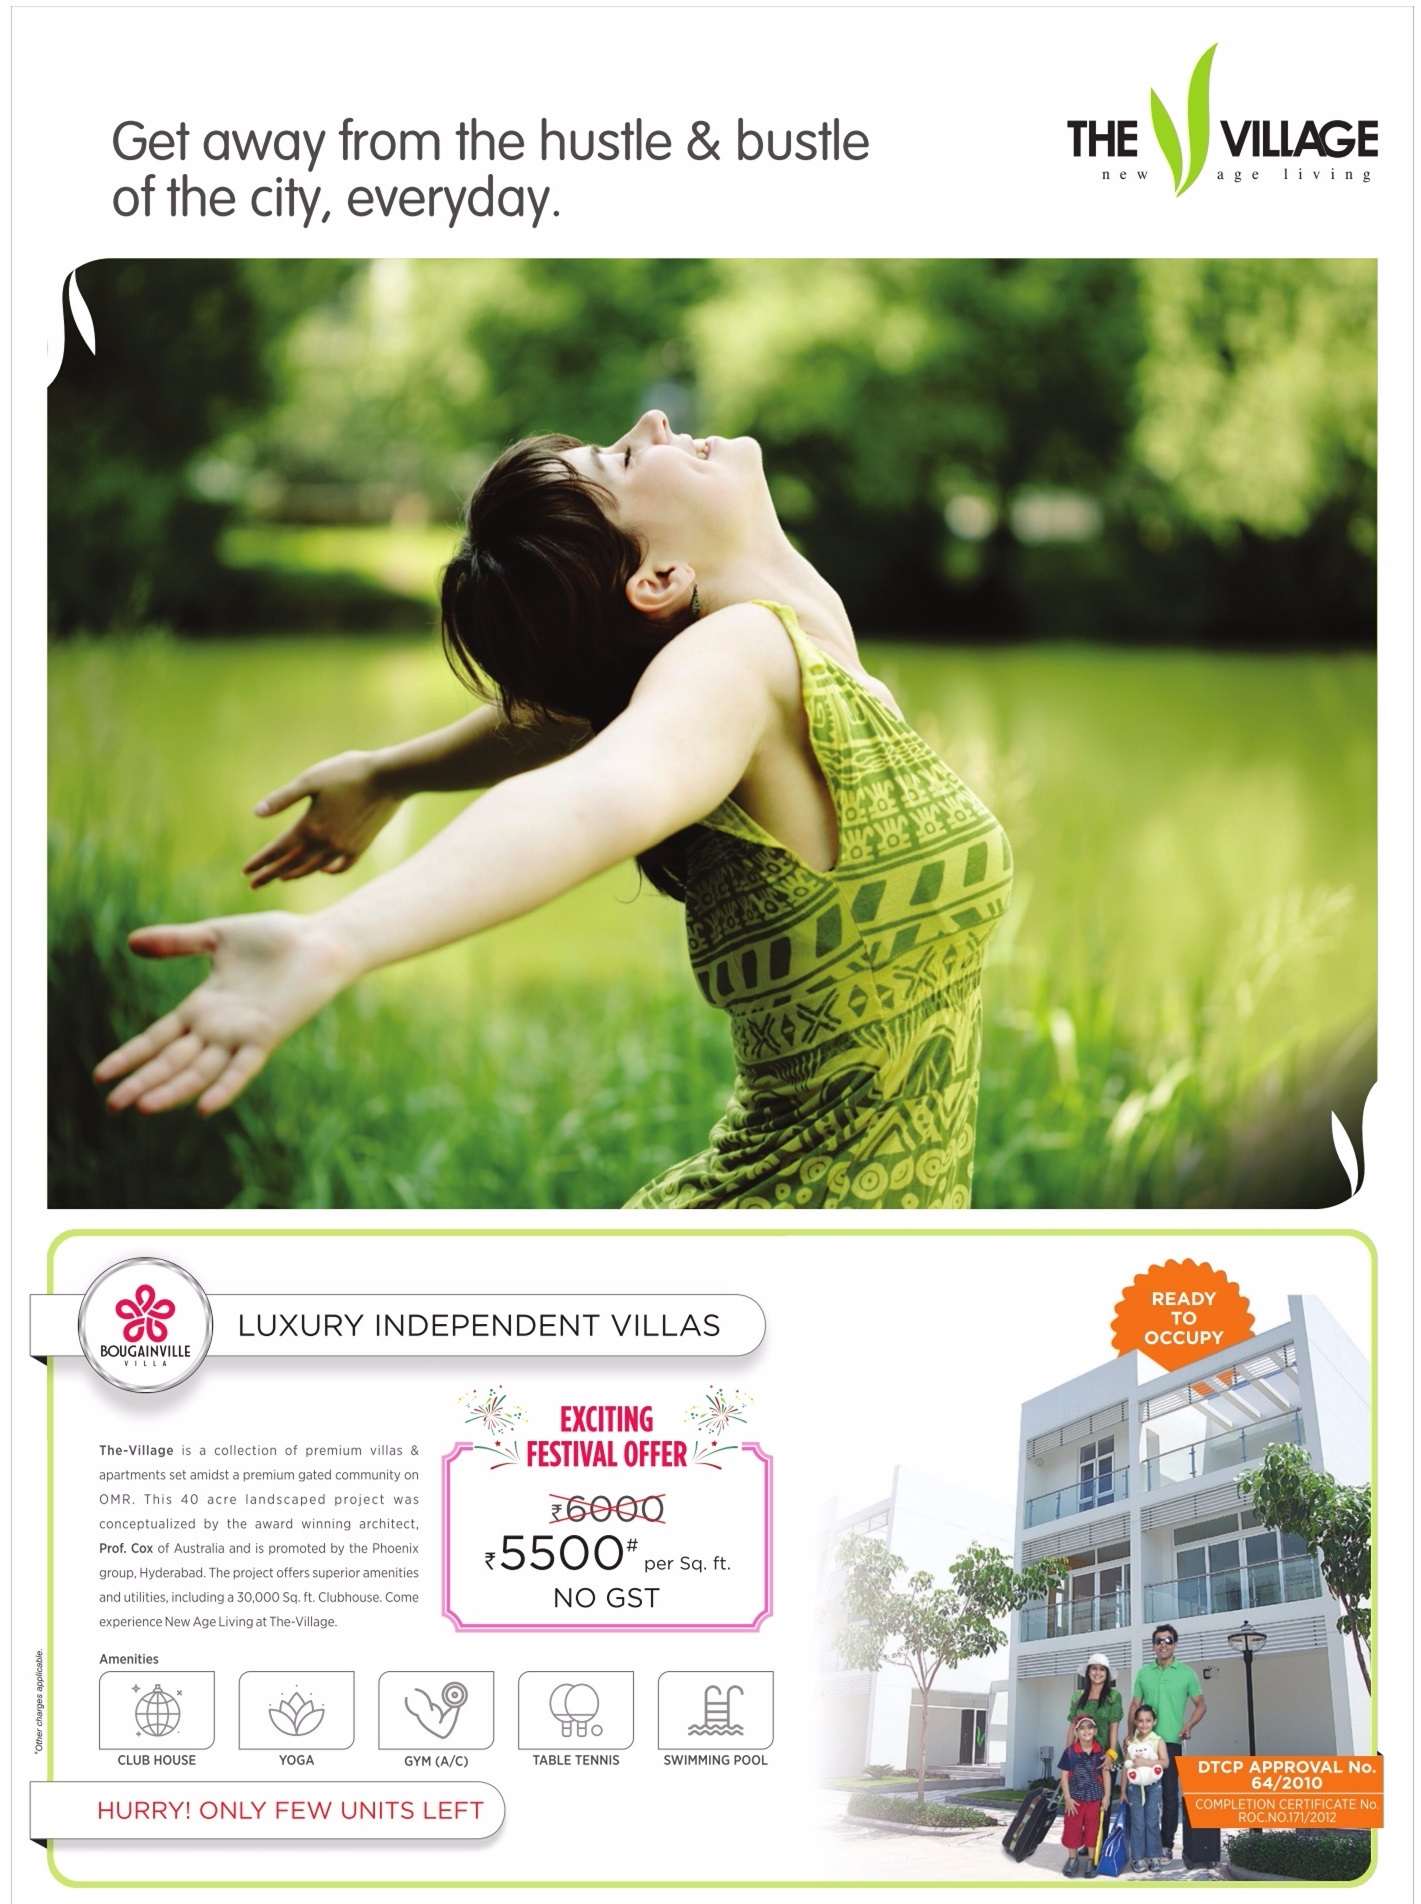 Come experience new age living getting away from hustle & bustle of city at Phoenix The Village in Chennai Update